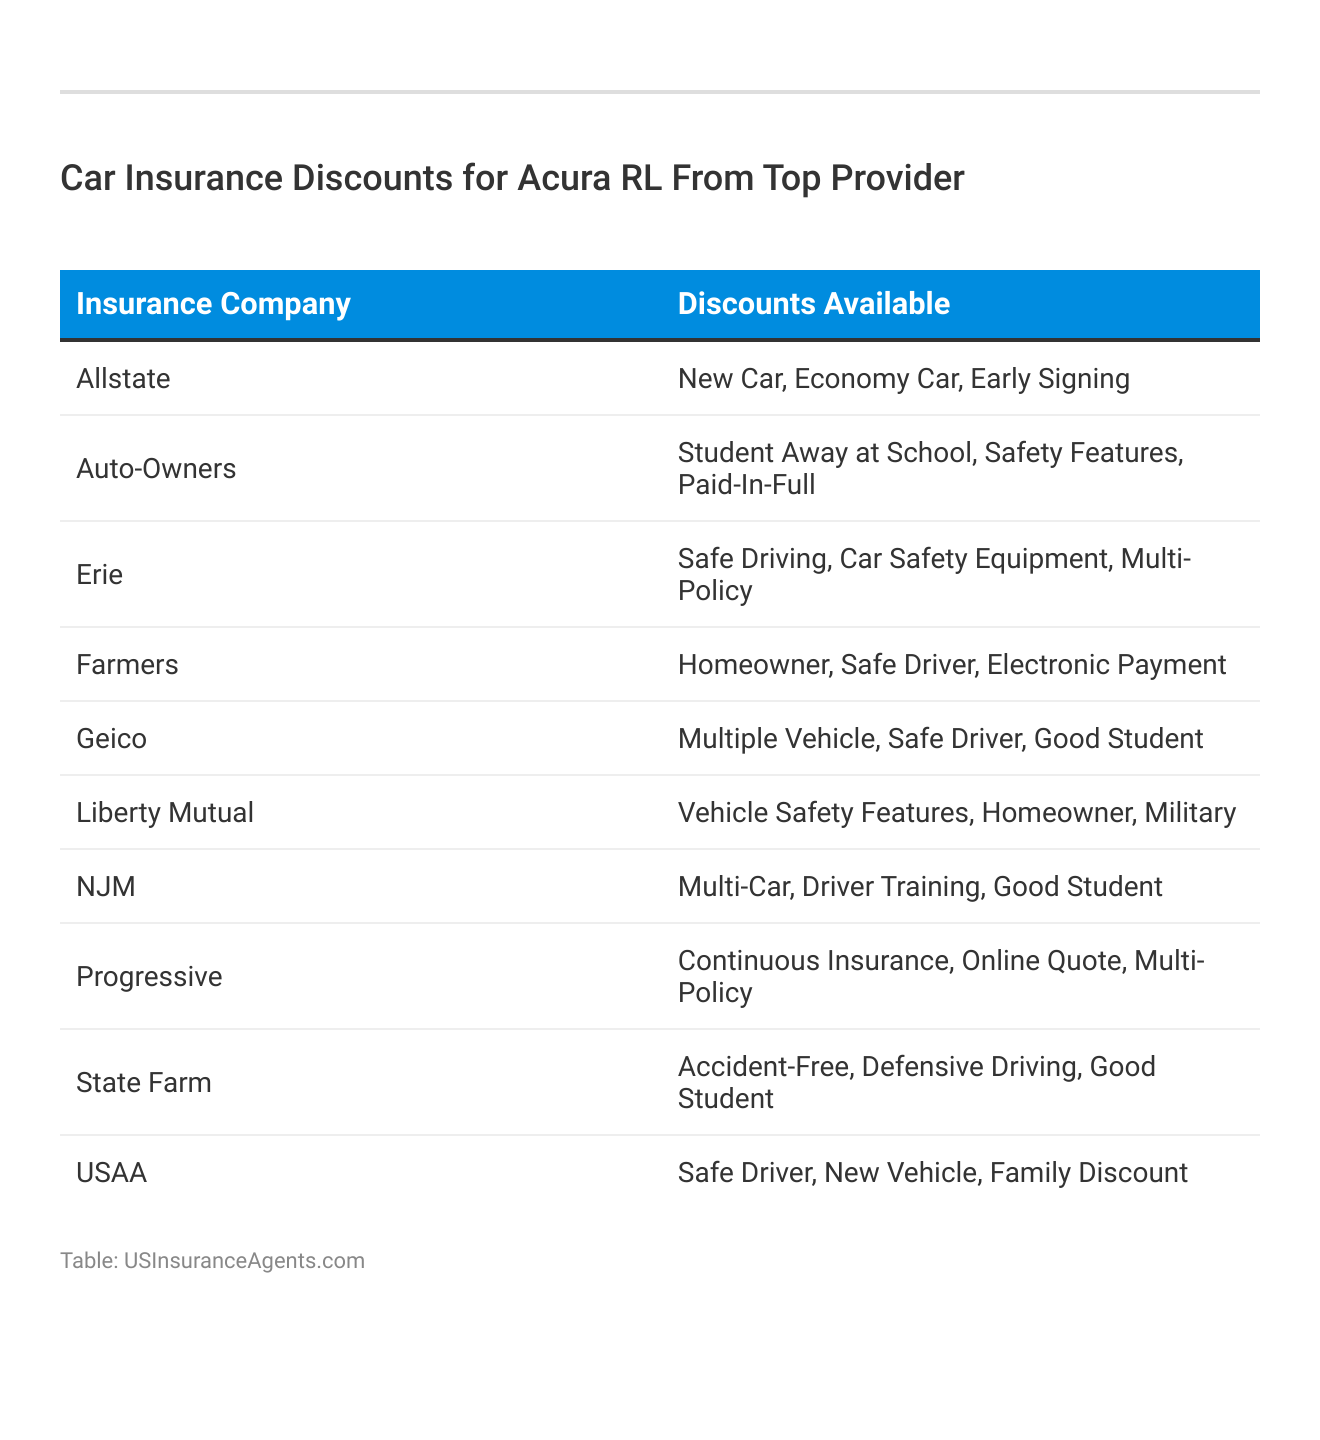 <h3>Car Insurance Discounts for Acura RL From Top Provider</h3>